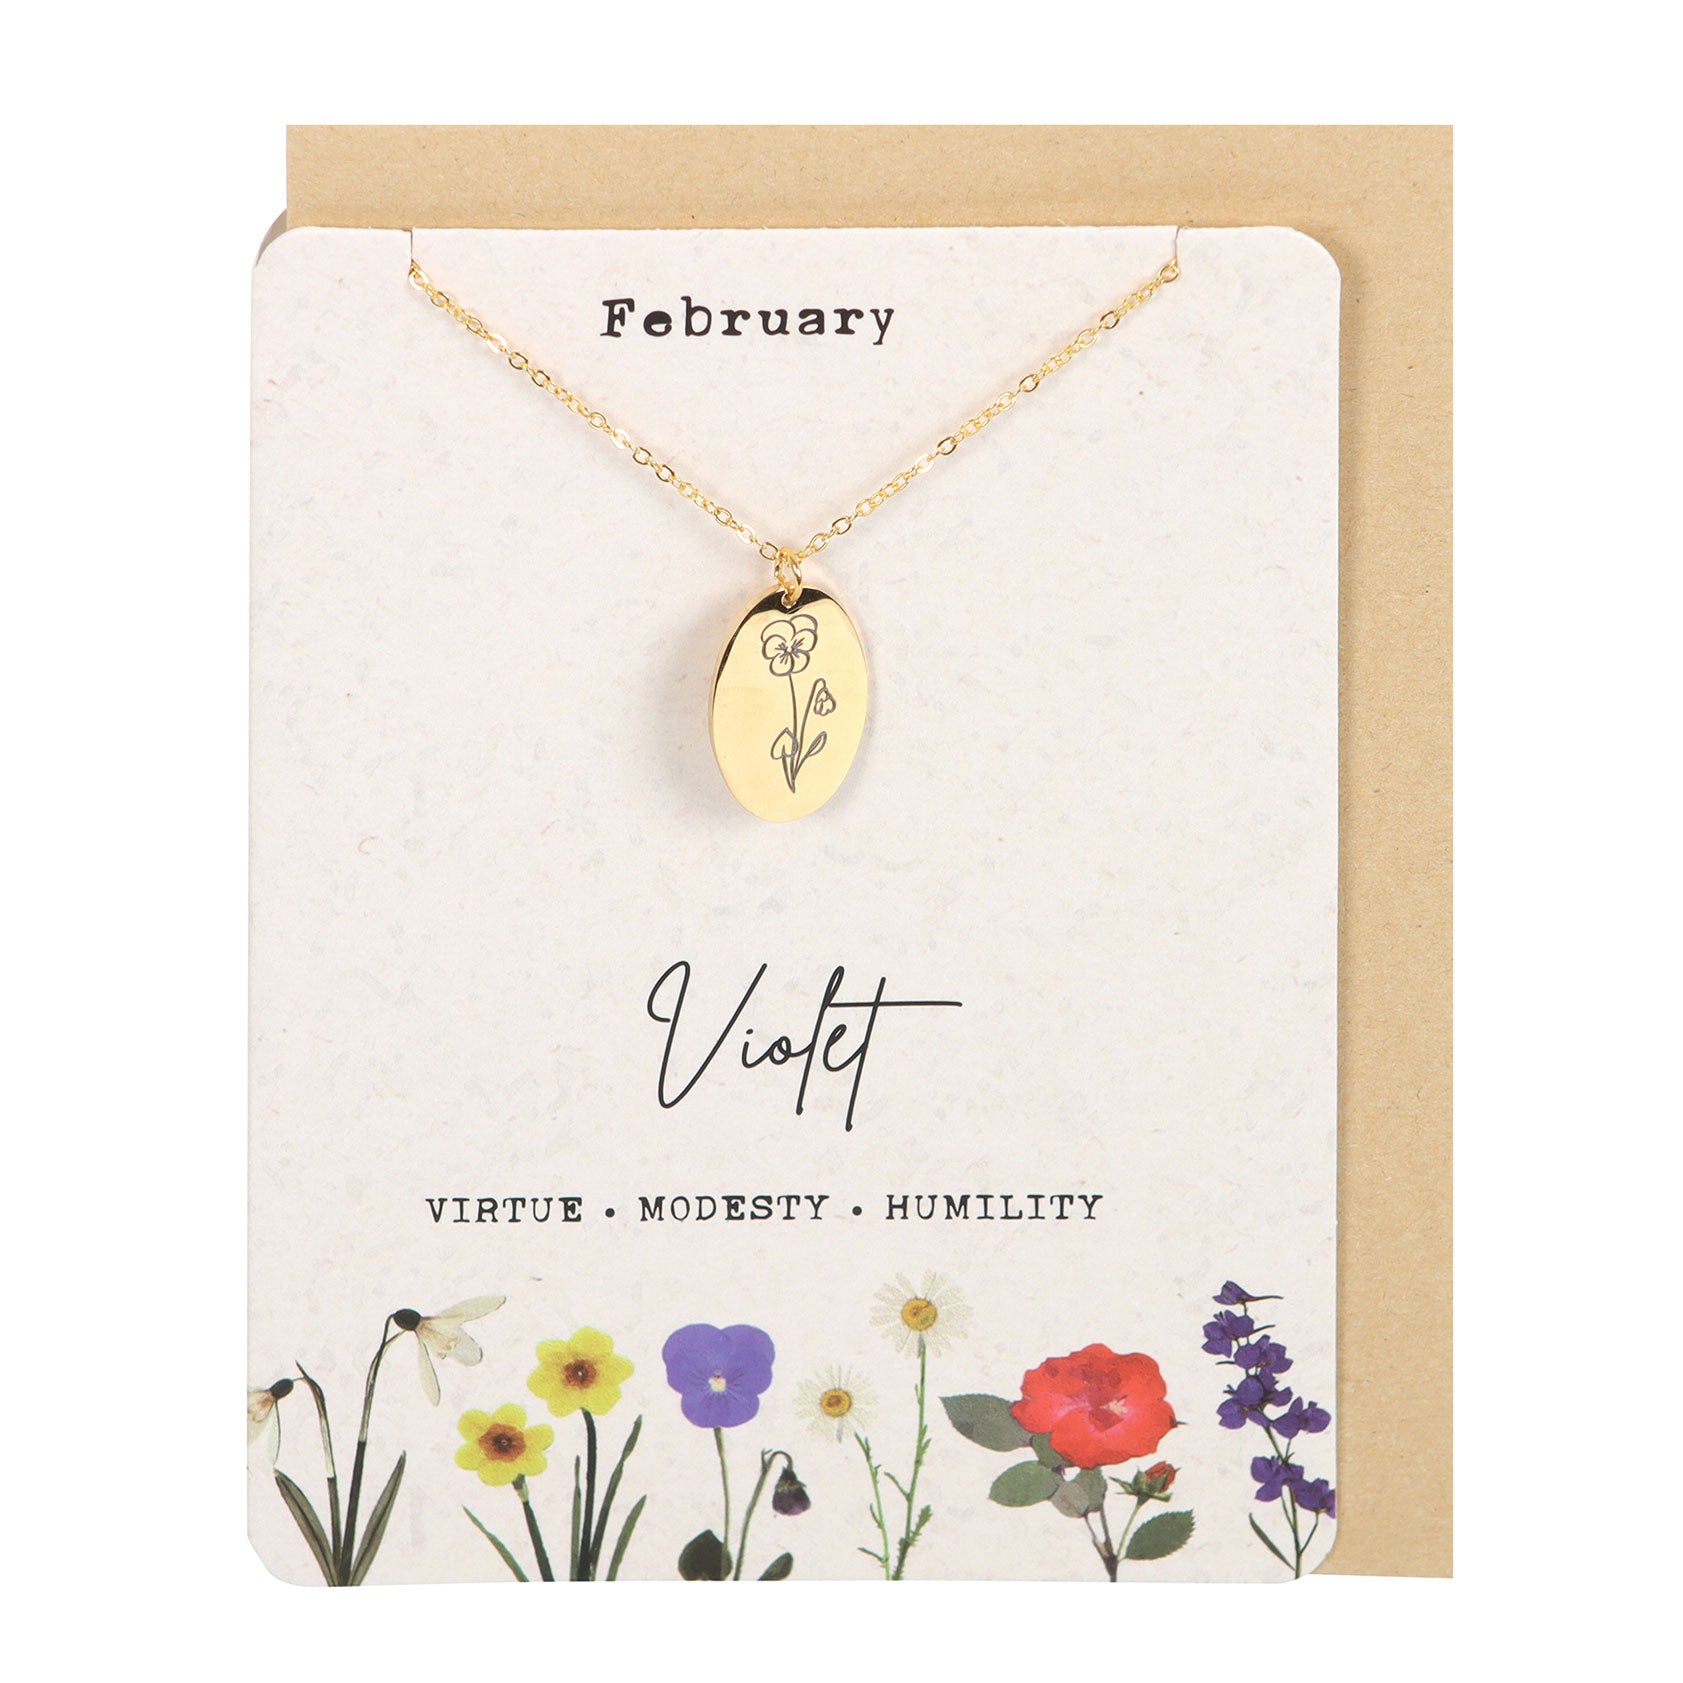 View February Violet Birth Flower Necklace Card information